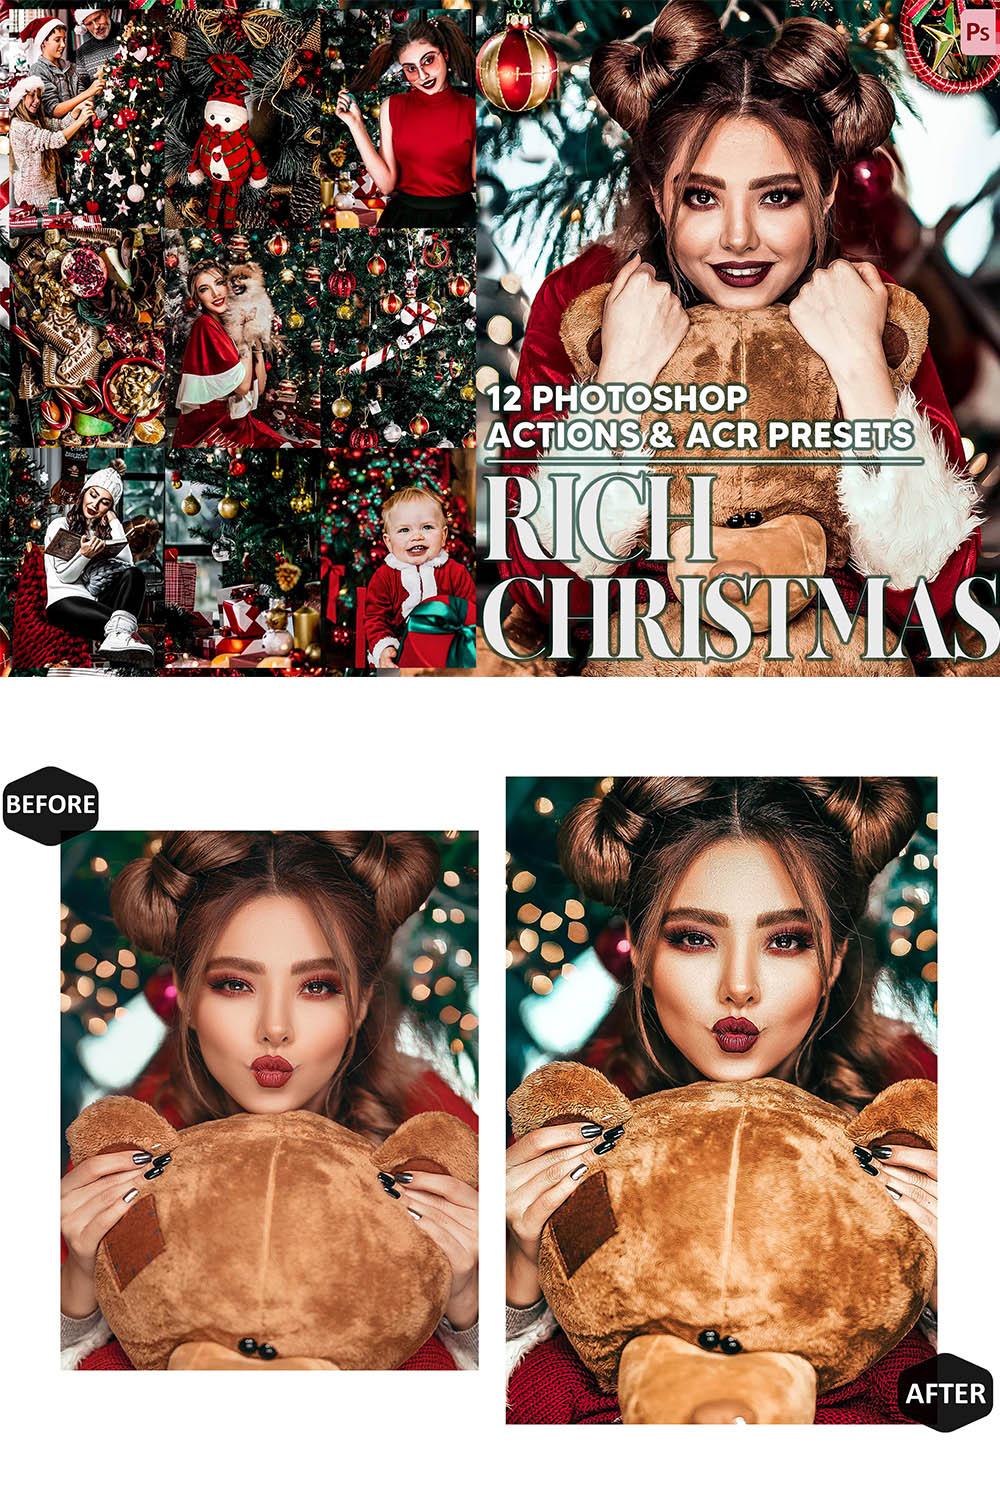 12 Photoshop Actions, Rich Christmas Ps Action, Moody ACR Preset, Winter Ps Filter, Atn Portrait And Lifestyle Theme For Instagram, Blogger pinterest preview image.